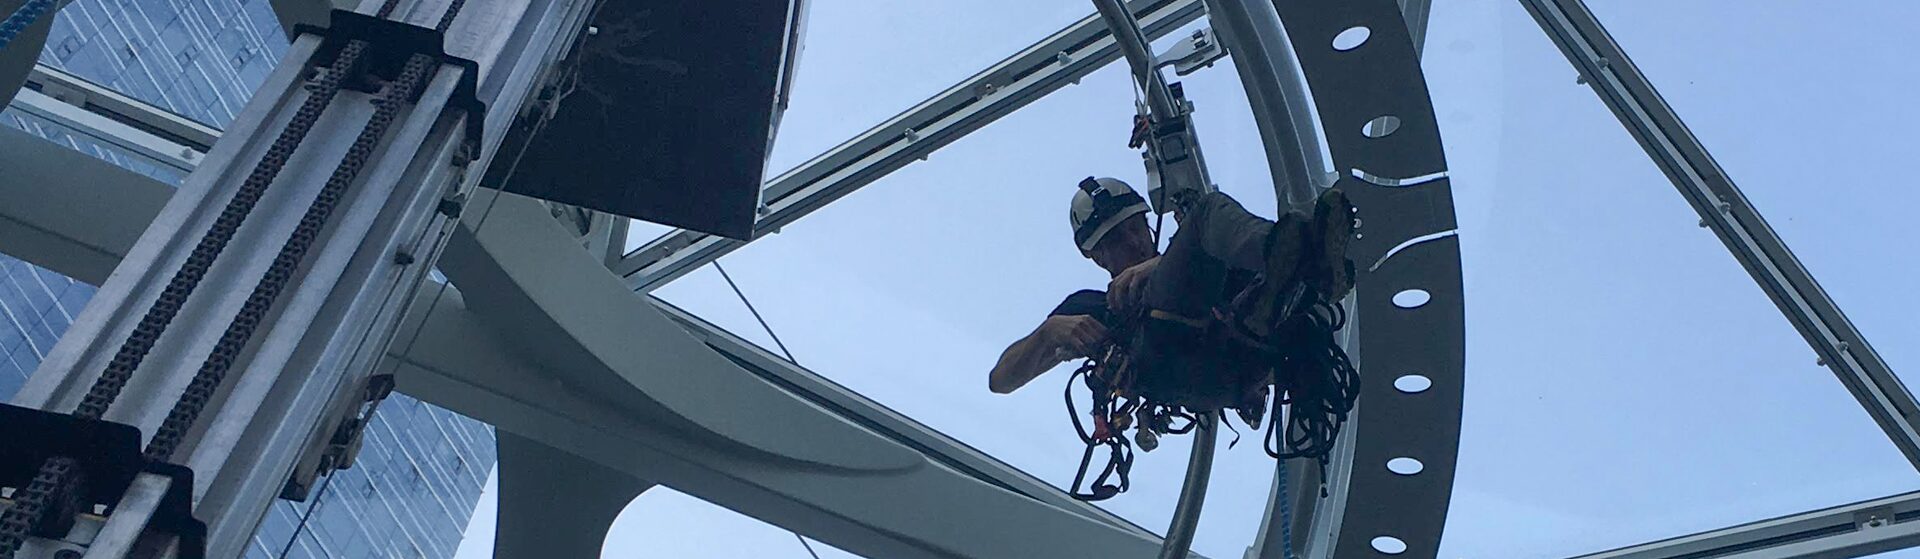 Rope access technician suspended in a spherical structure